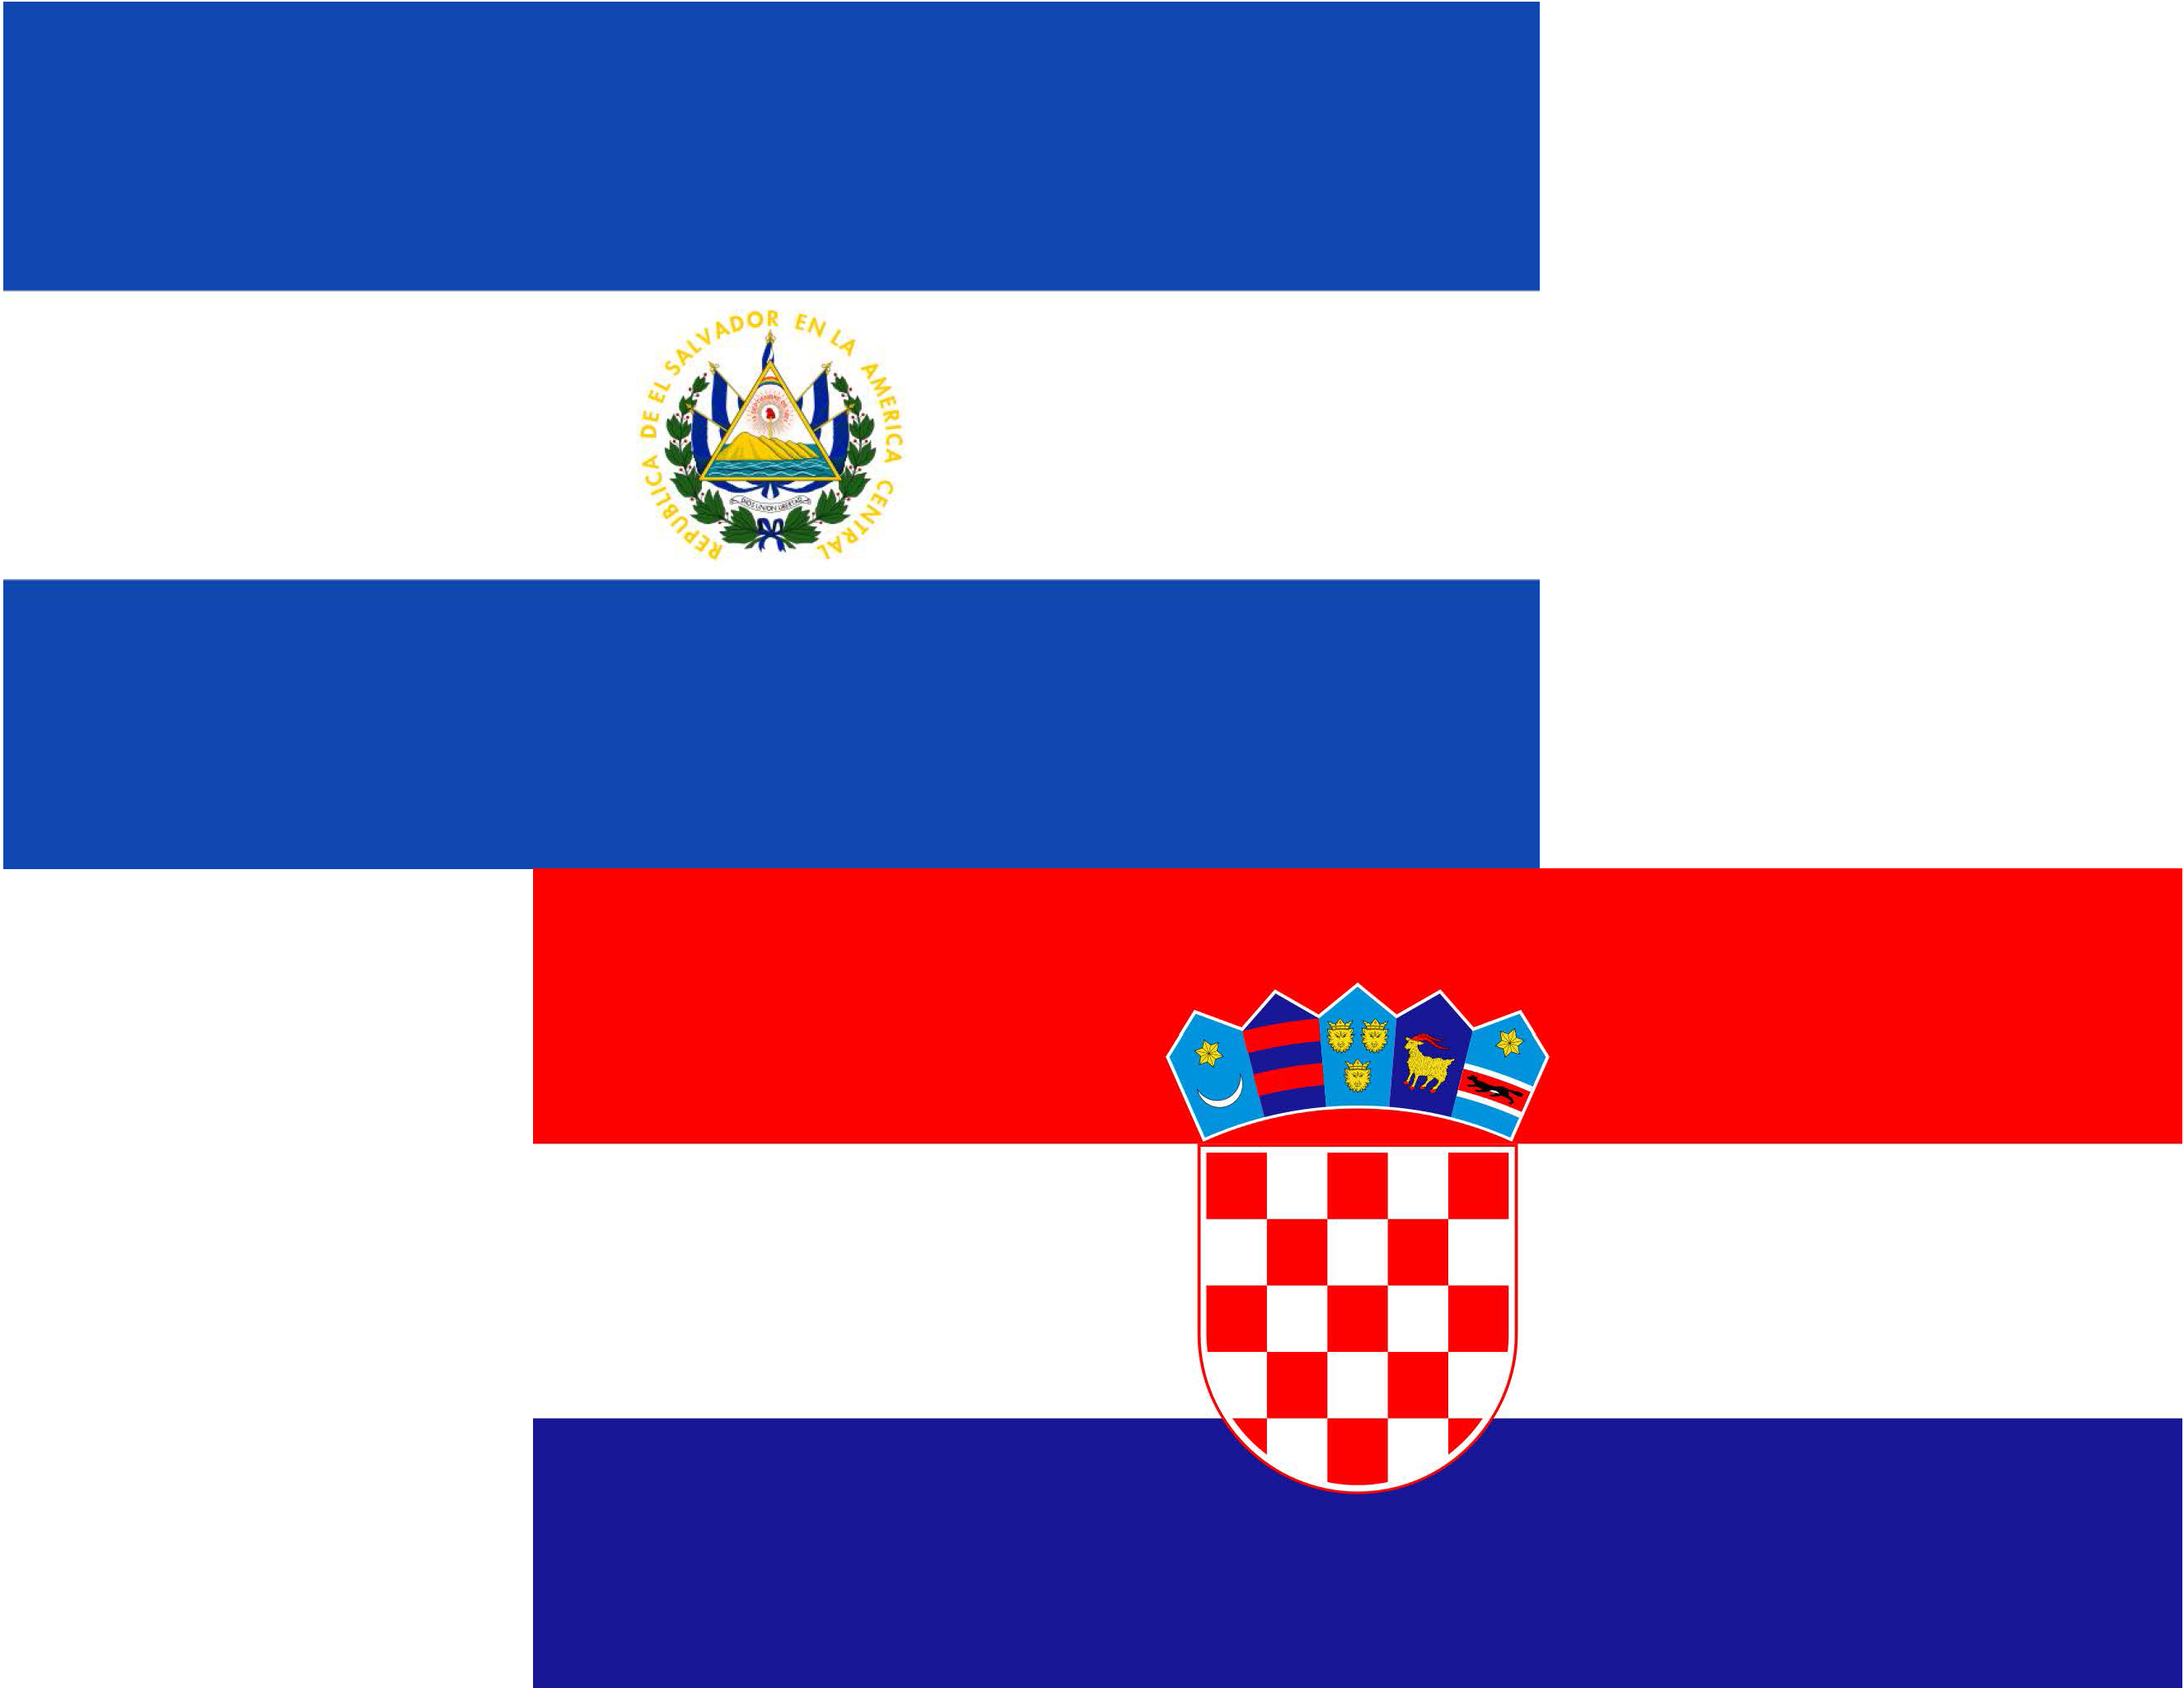 Ratification of the Convention by Argentina and Croatia